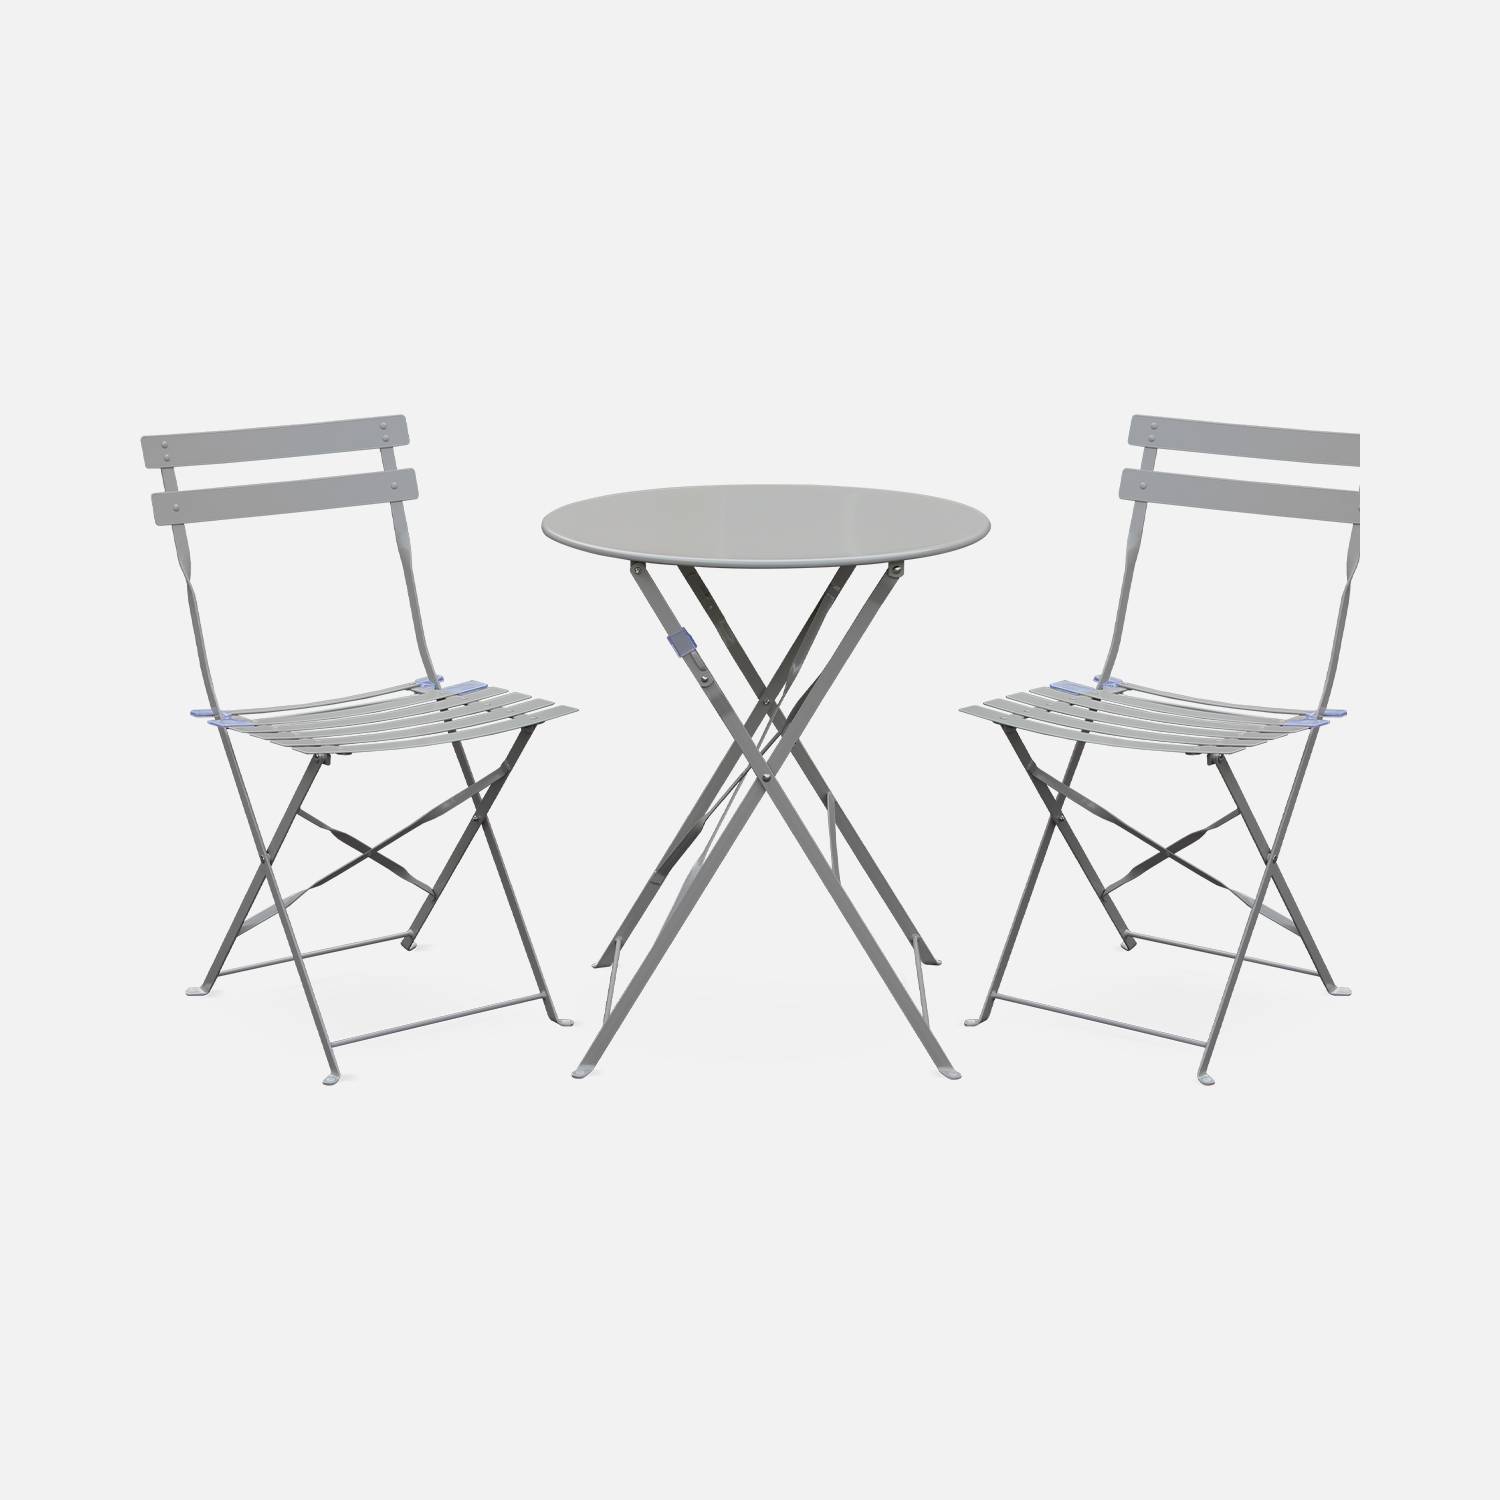 2-seater foldable thermo-lacquered steel bistro garden table with chairs, Ø60cm - Emilia - Taupe grey,sweeek,Photo2